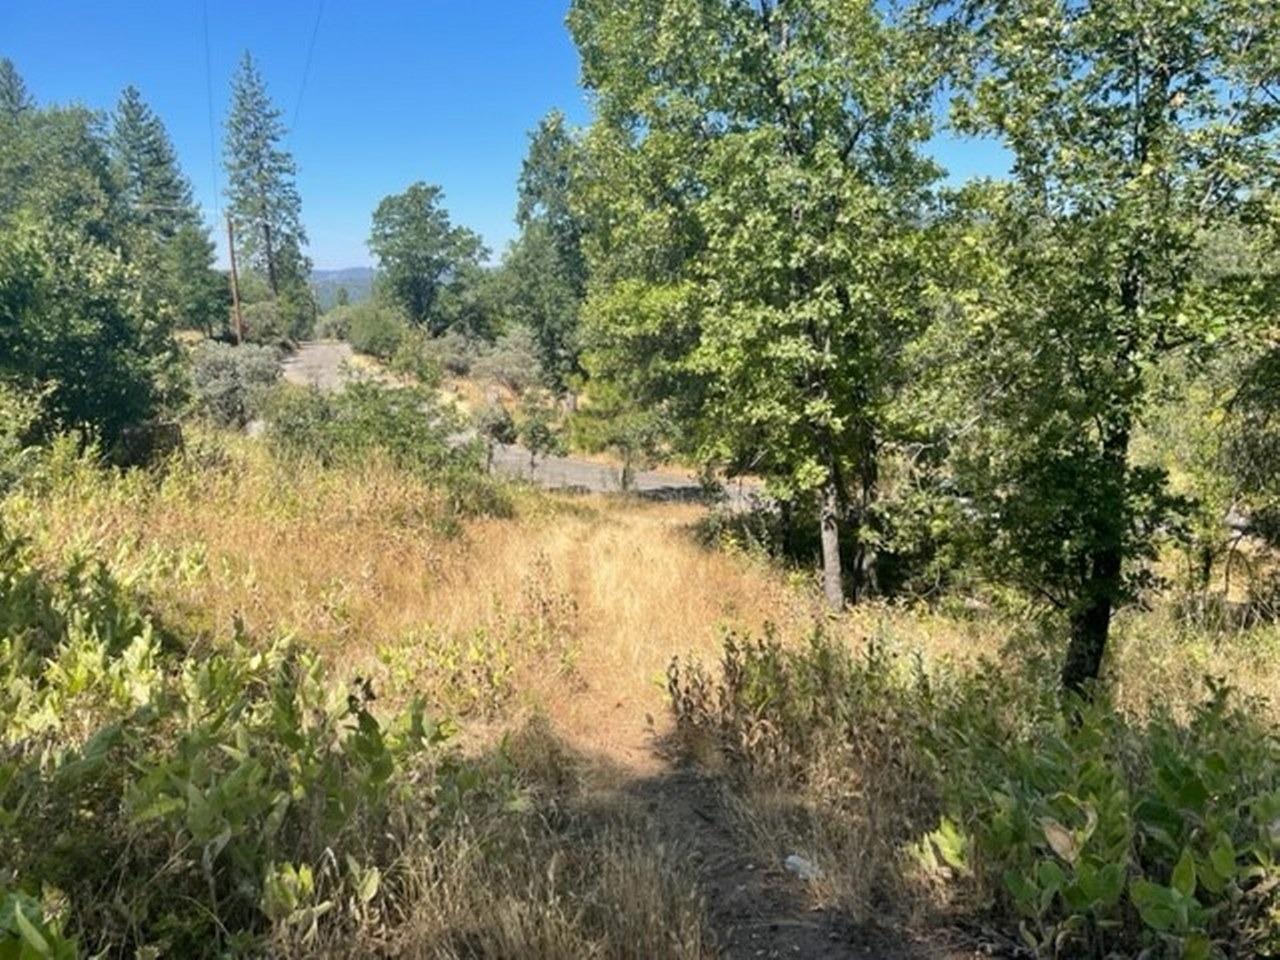 Quiet location near North Fork! 3.07+/- acres on a water system with beautiful views! Power is on the property and paved road access. Perfect spot for a vacation getaway or full time residence! Owner will finance with $10,000 down all due in 3 to 5 years. Neighboring 2.51+/- acre parcel is also available!